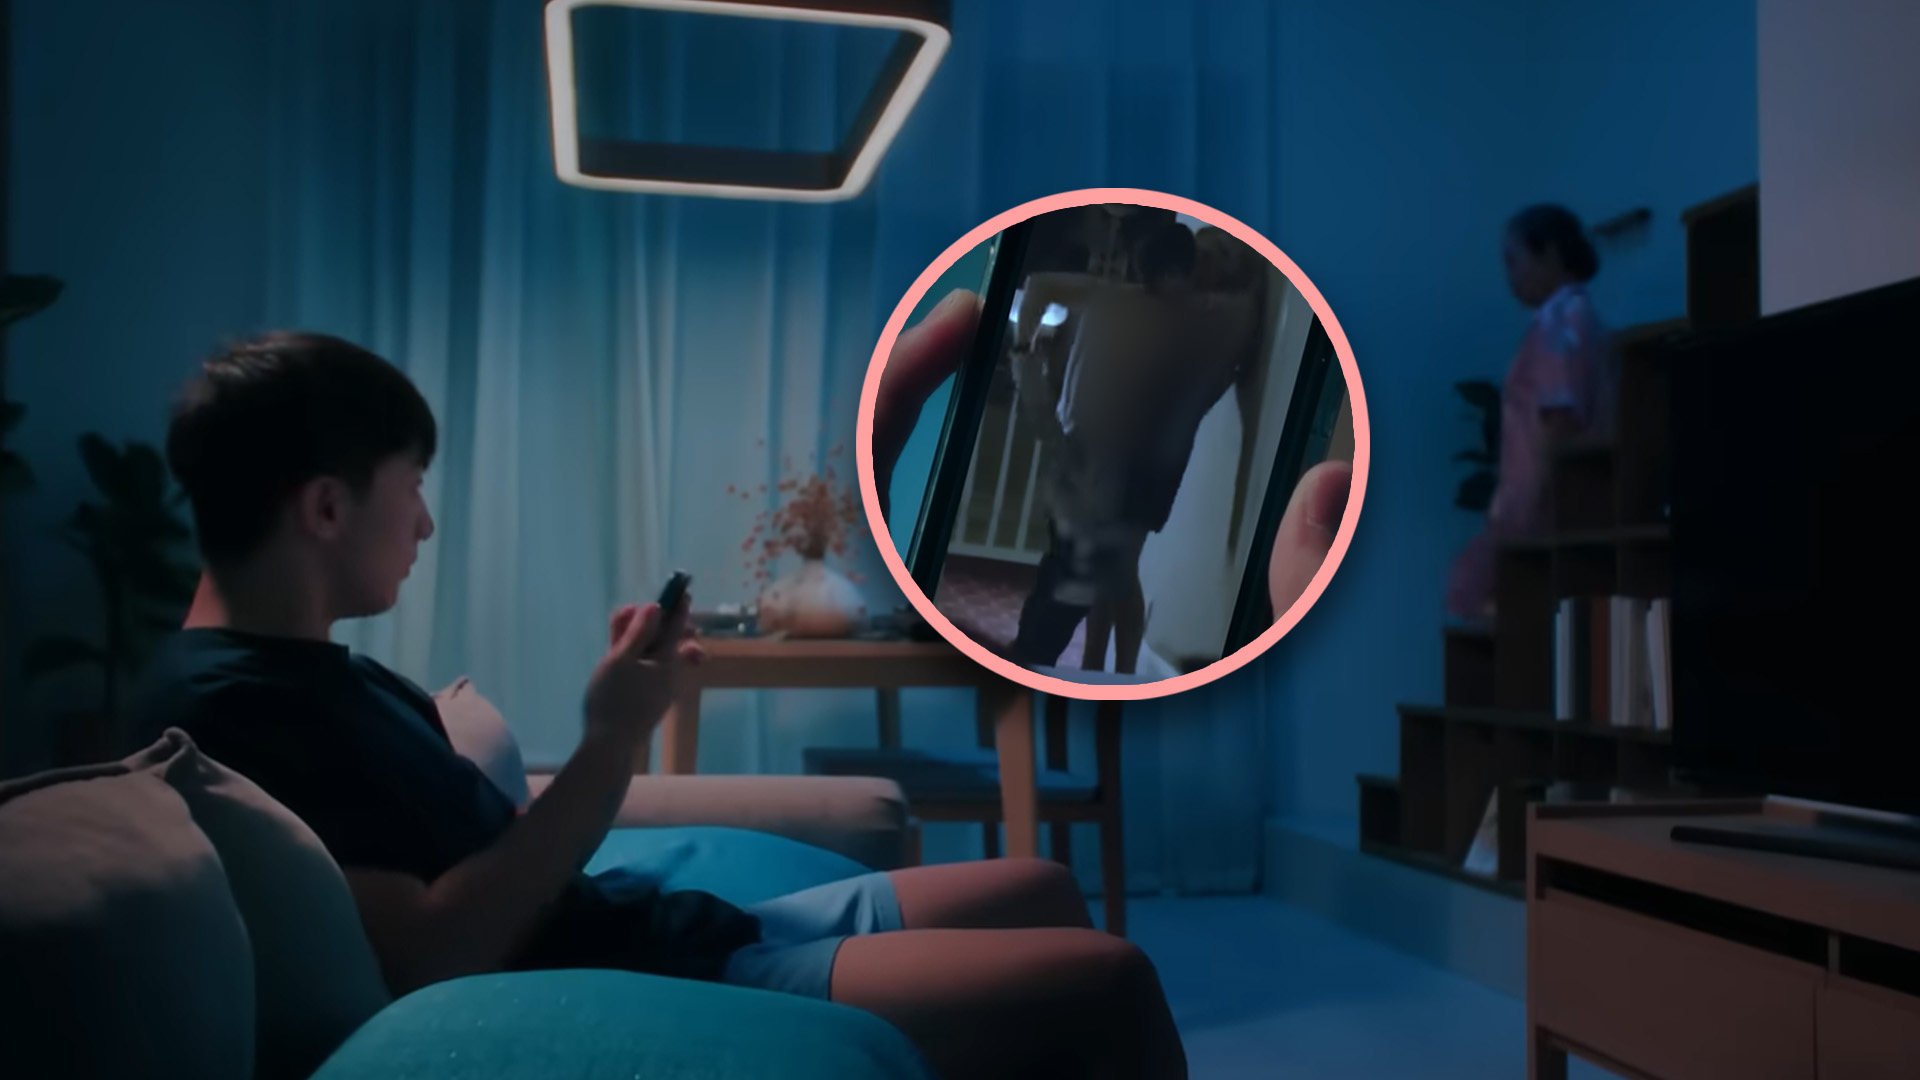 A Singapore telecoms firm has stoked controversy with an advert in which a mother respects her son’s right to watch pornography. Photo: SCMP composite/YouTube